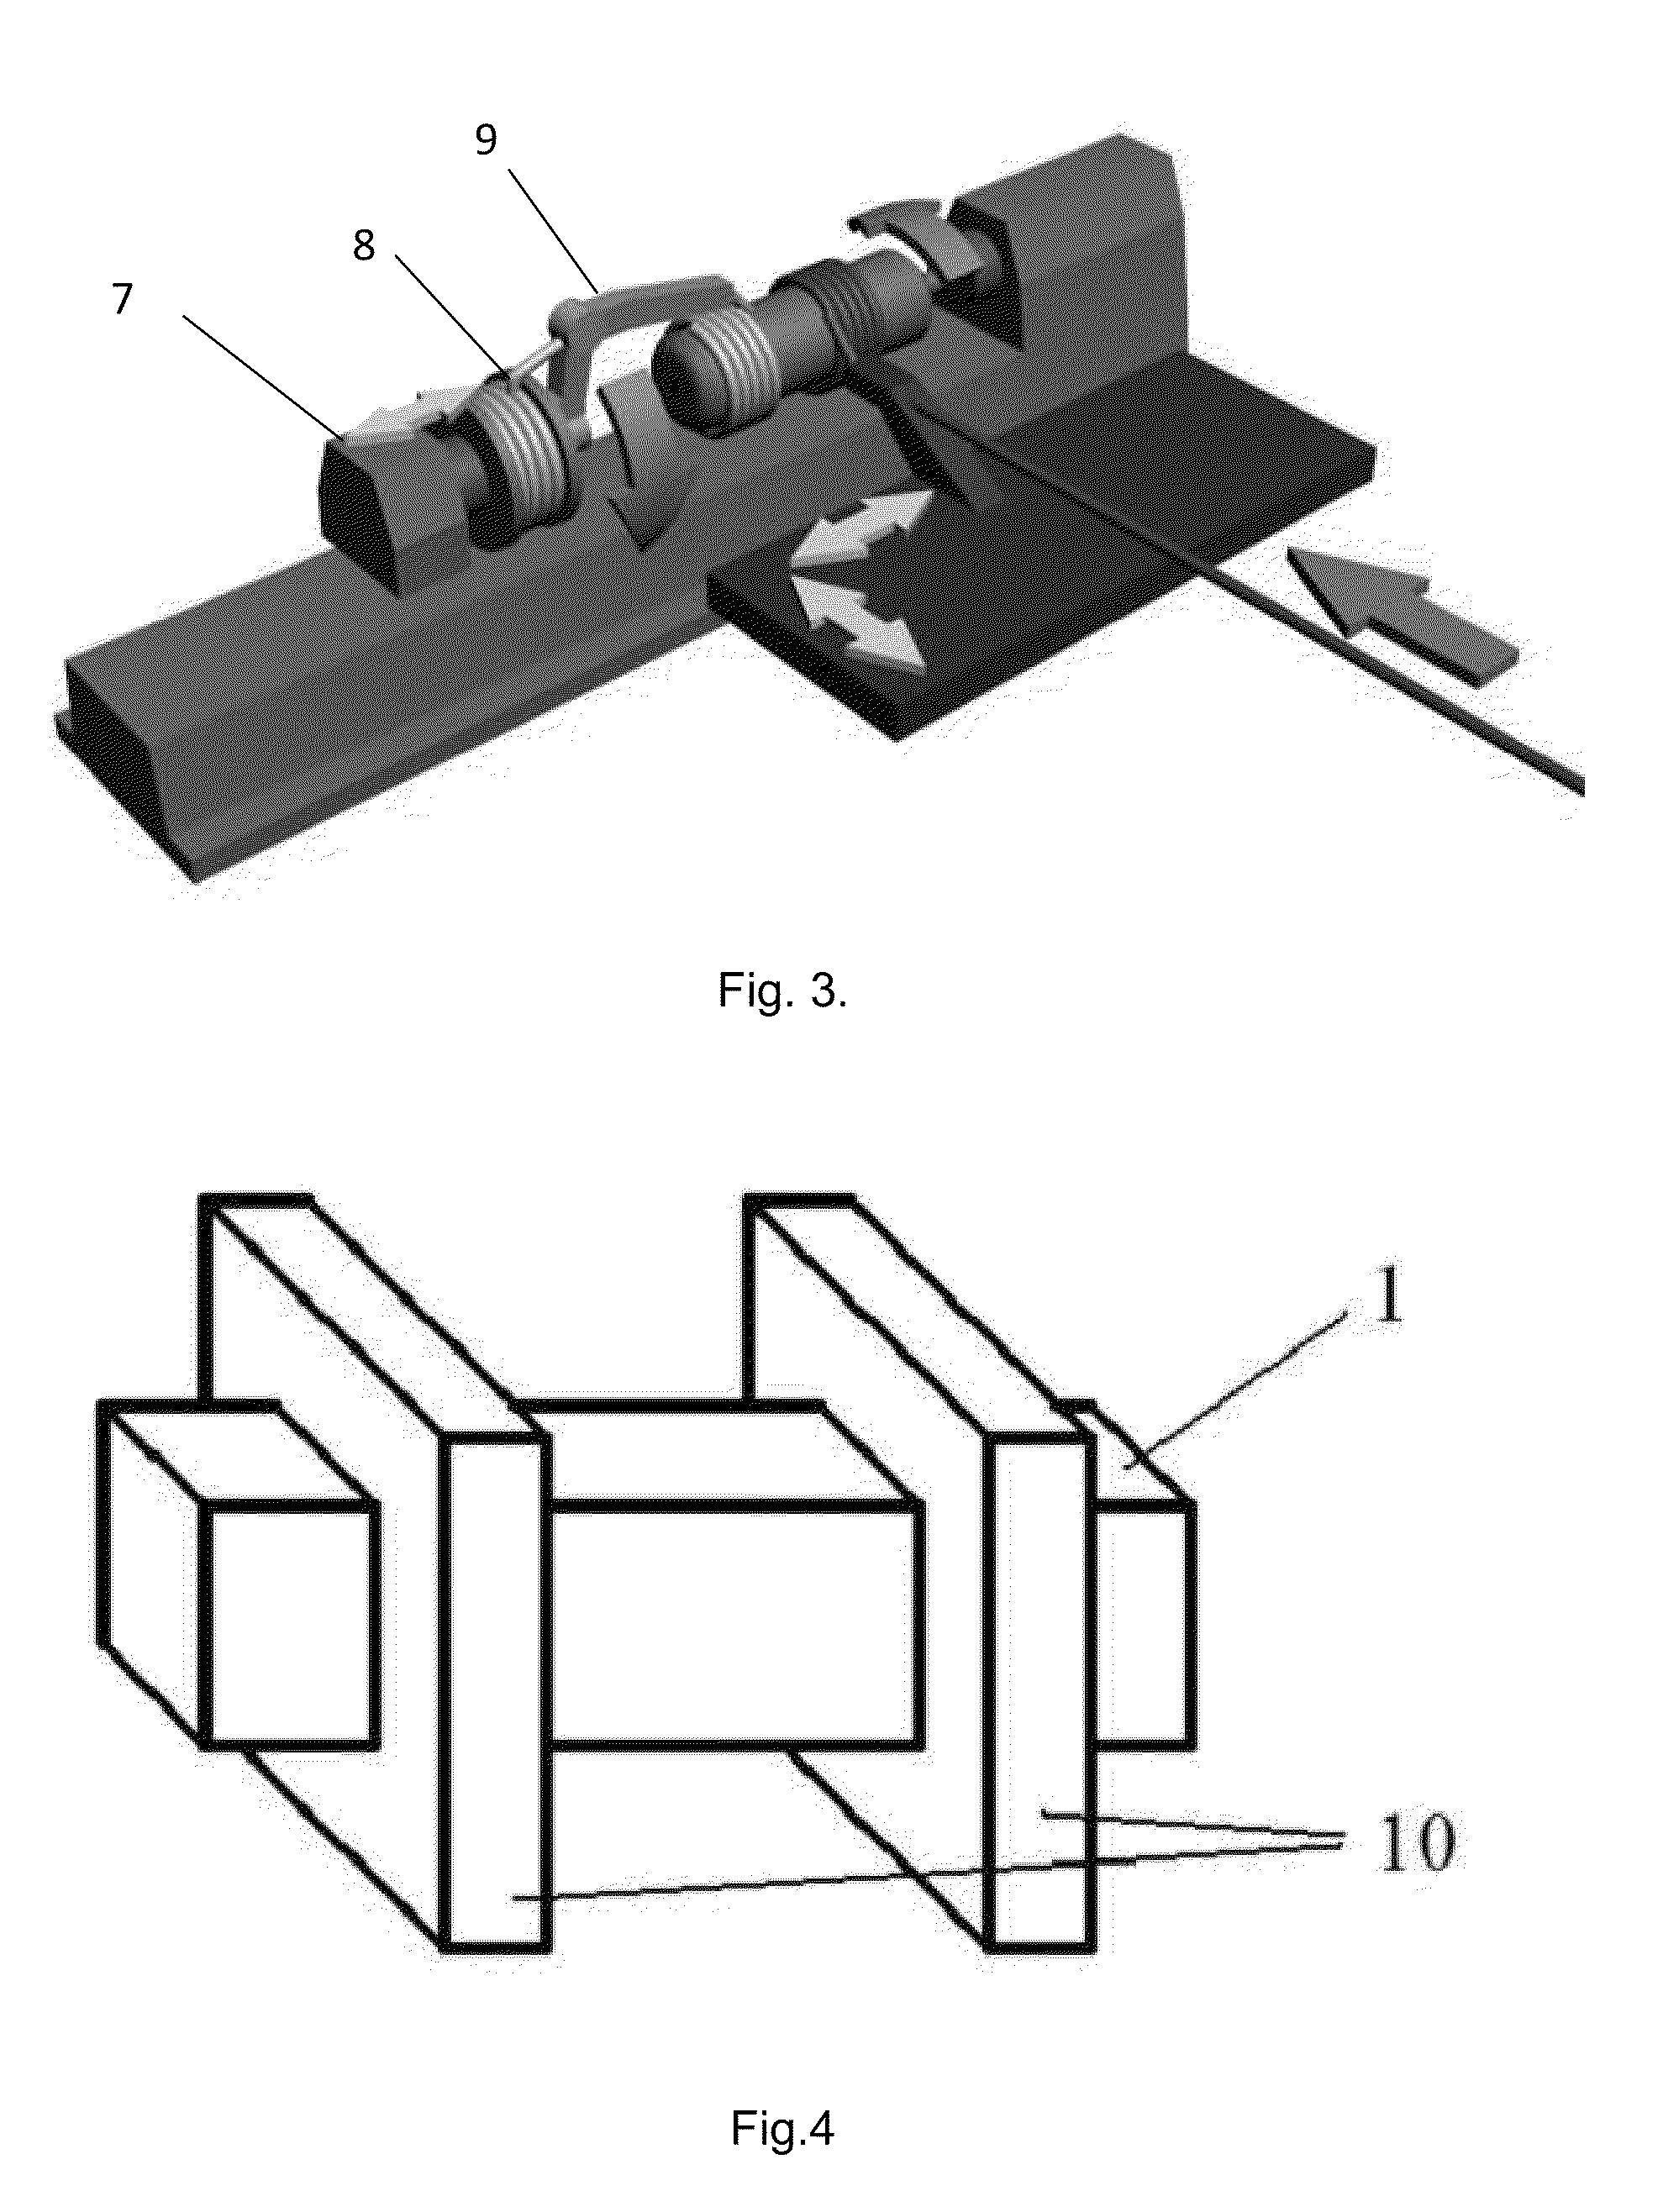 Method for making electrical windings for electrical apparatus and transformers and windings obtained by said method